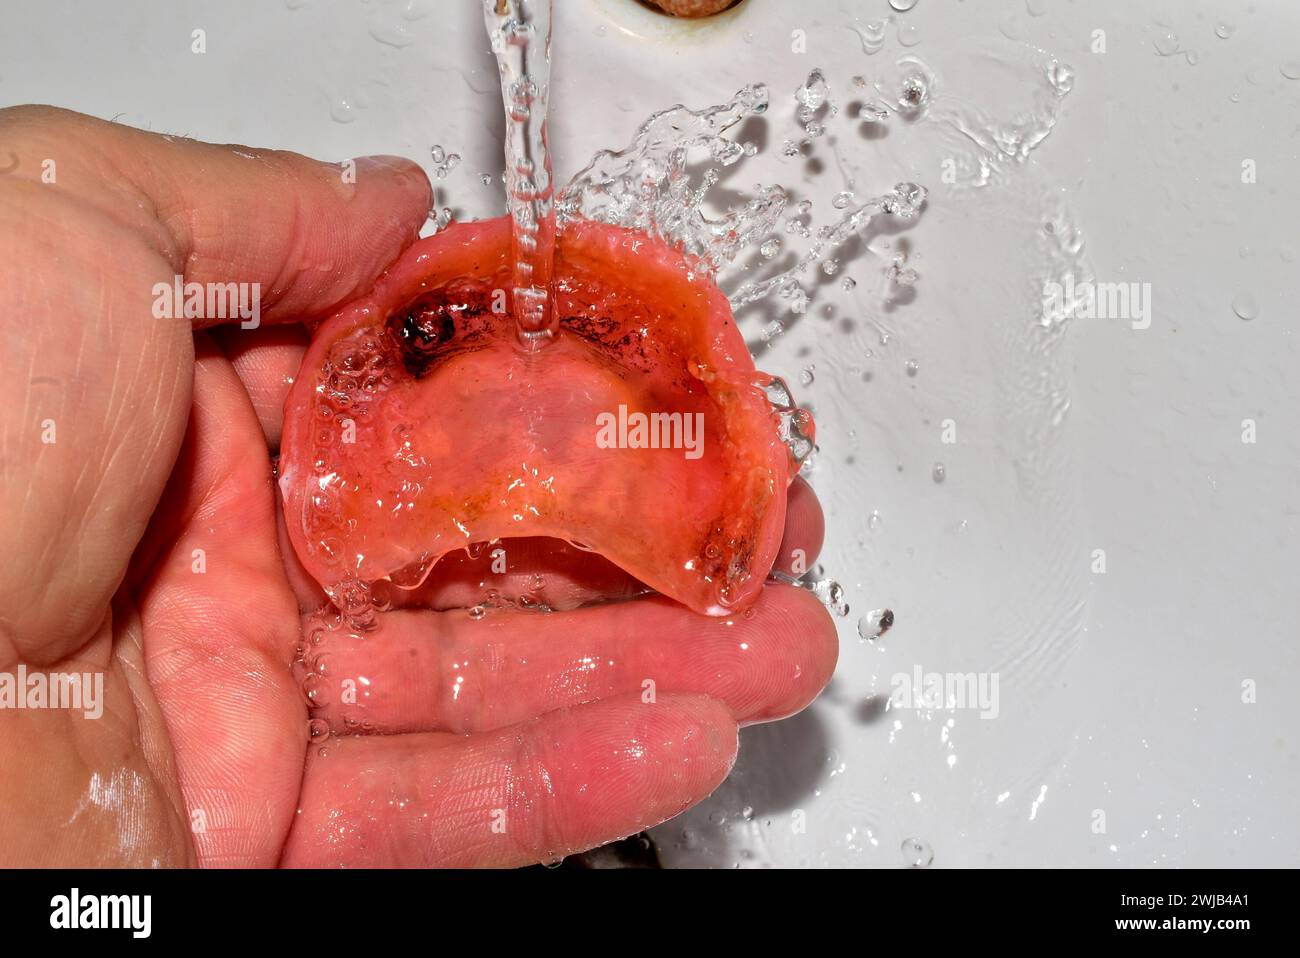 Close-up of a removable upper jaw that is being washed under running water. Stock Photo